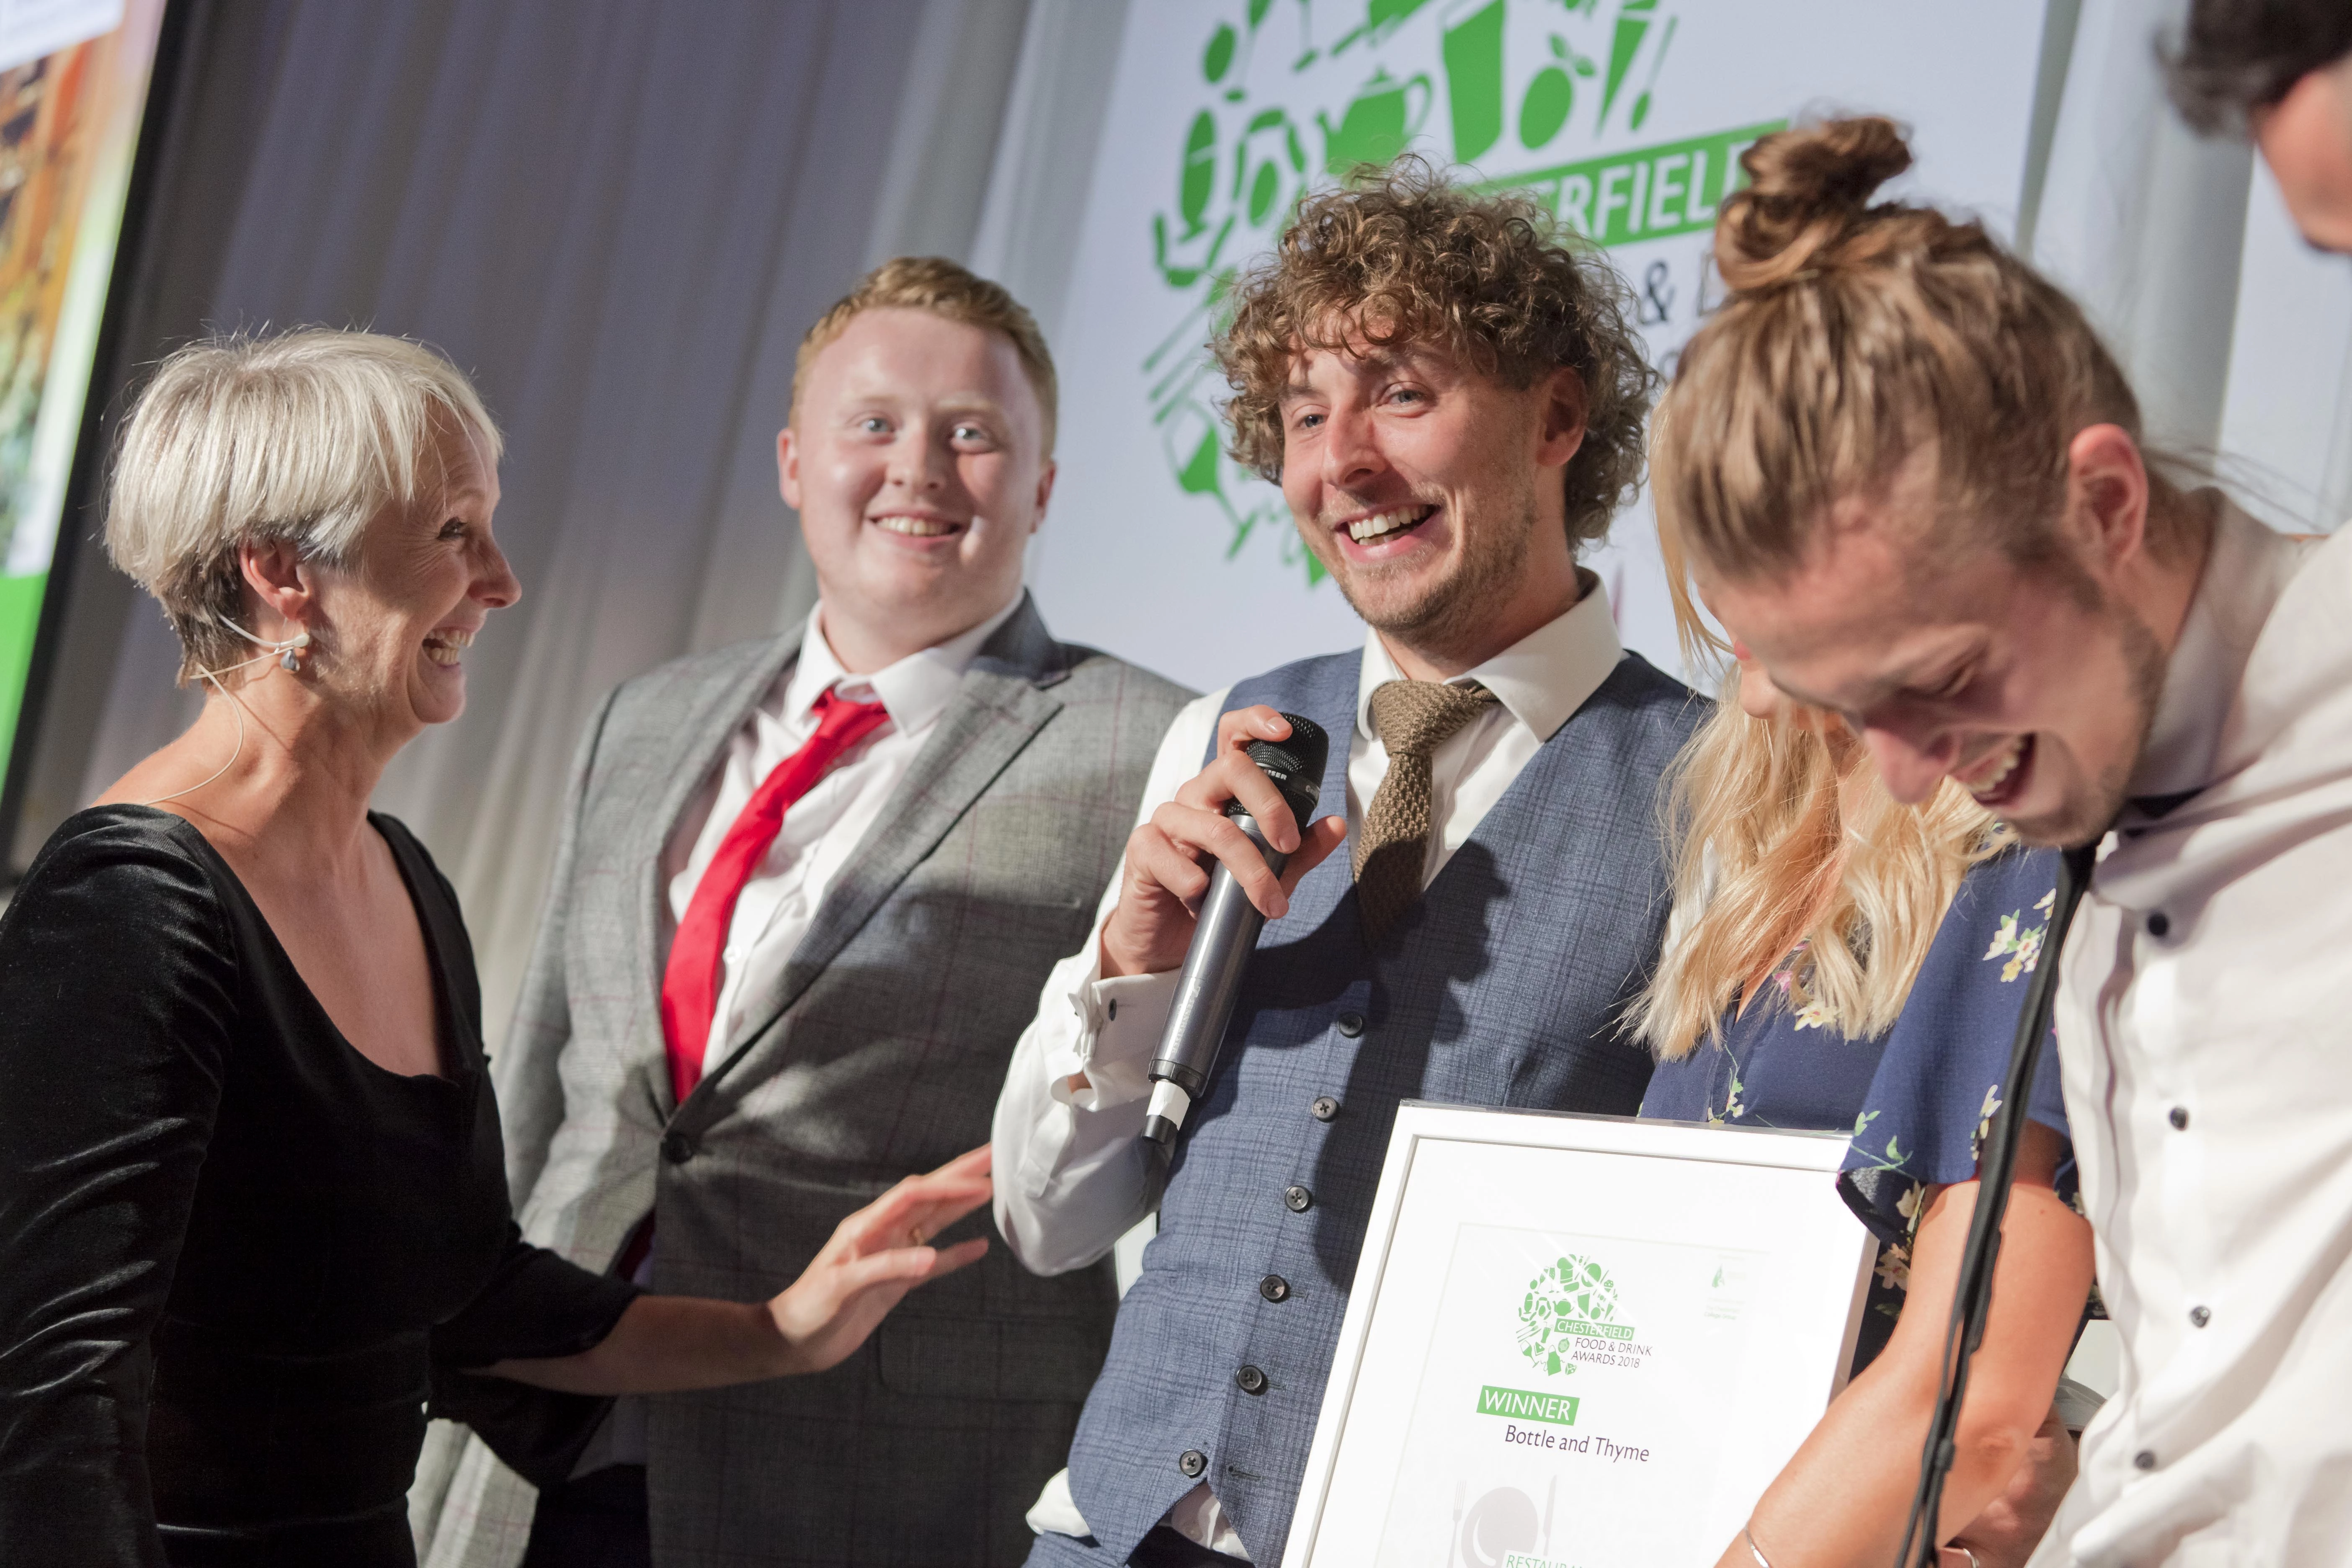 Bottle and Thyme - Restaurant of the Year Winners